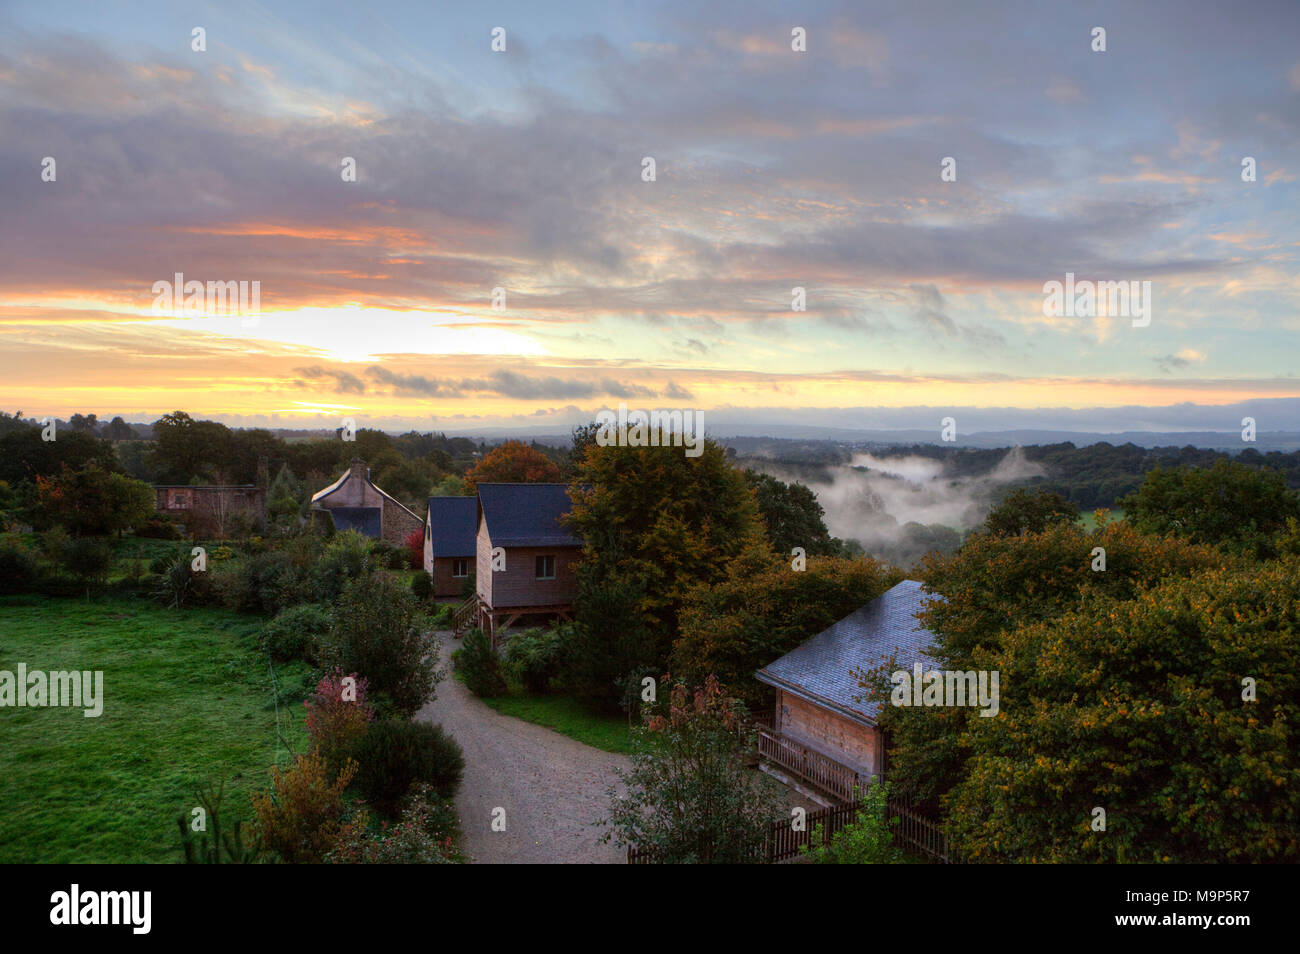 Early morning fog at Domaine de Mero, Plonevez-du-Faou, Brittany, France Stock Photo